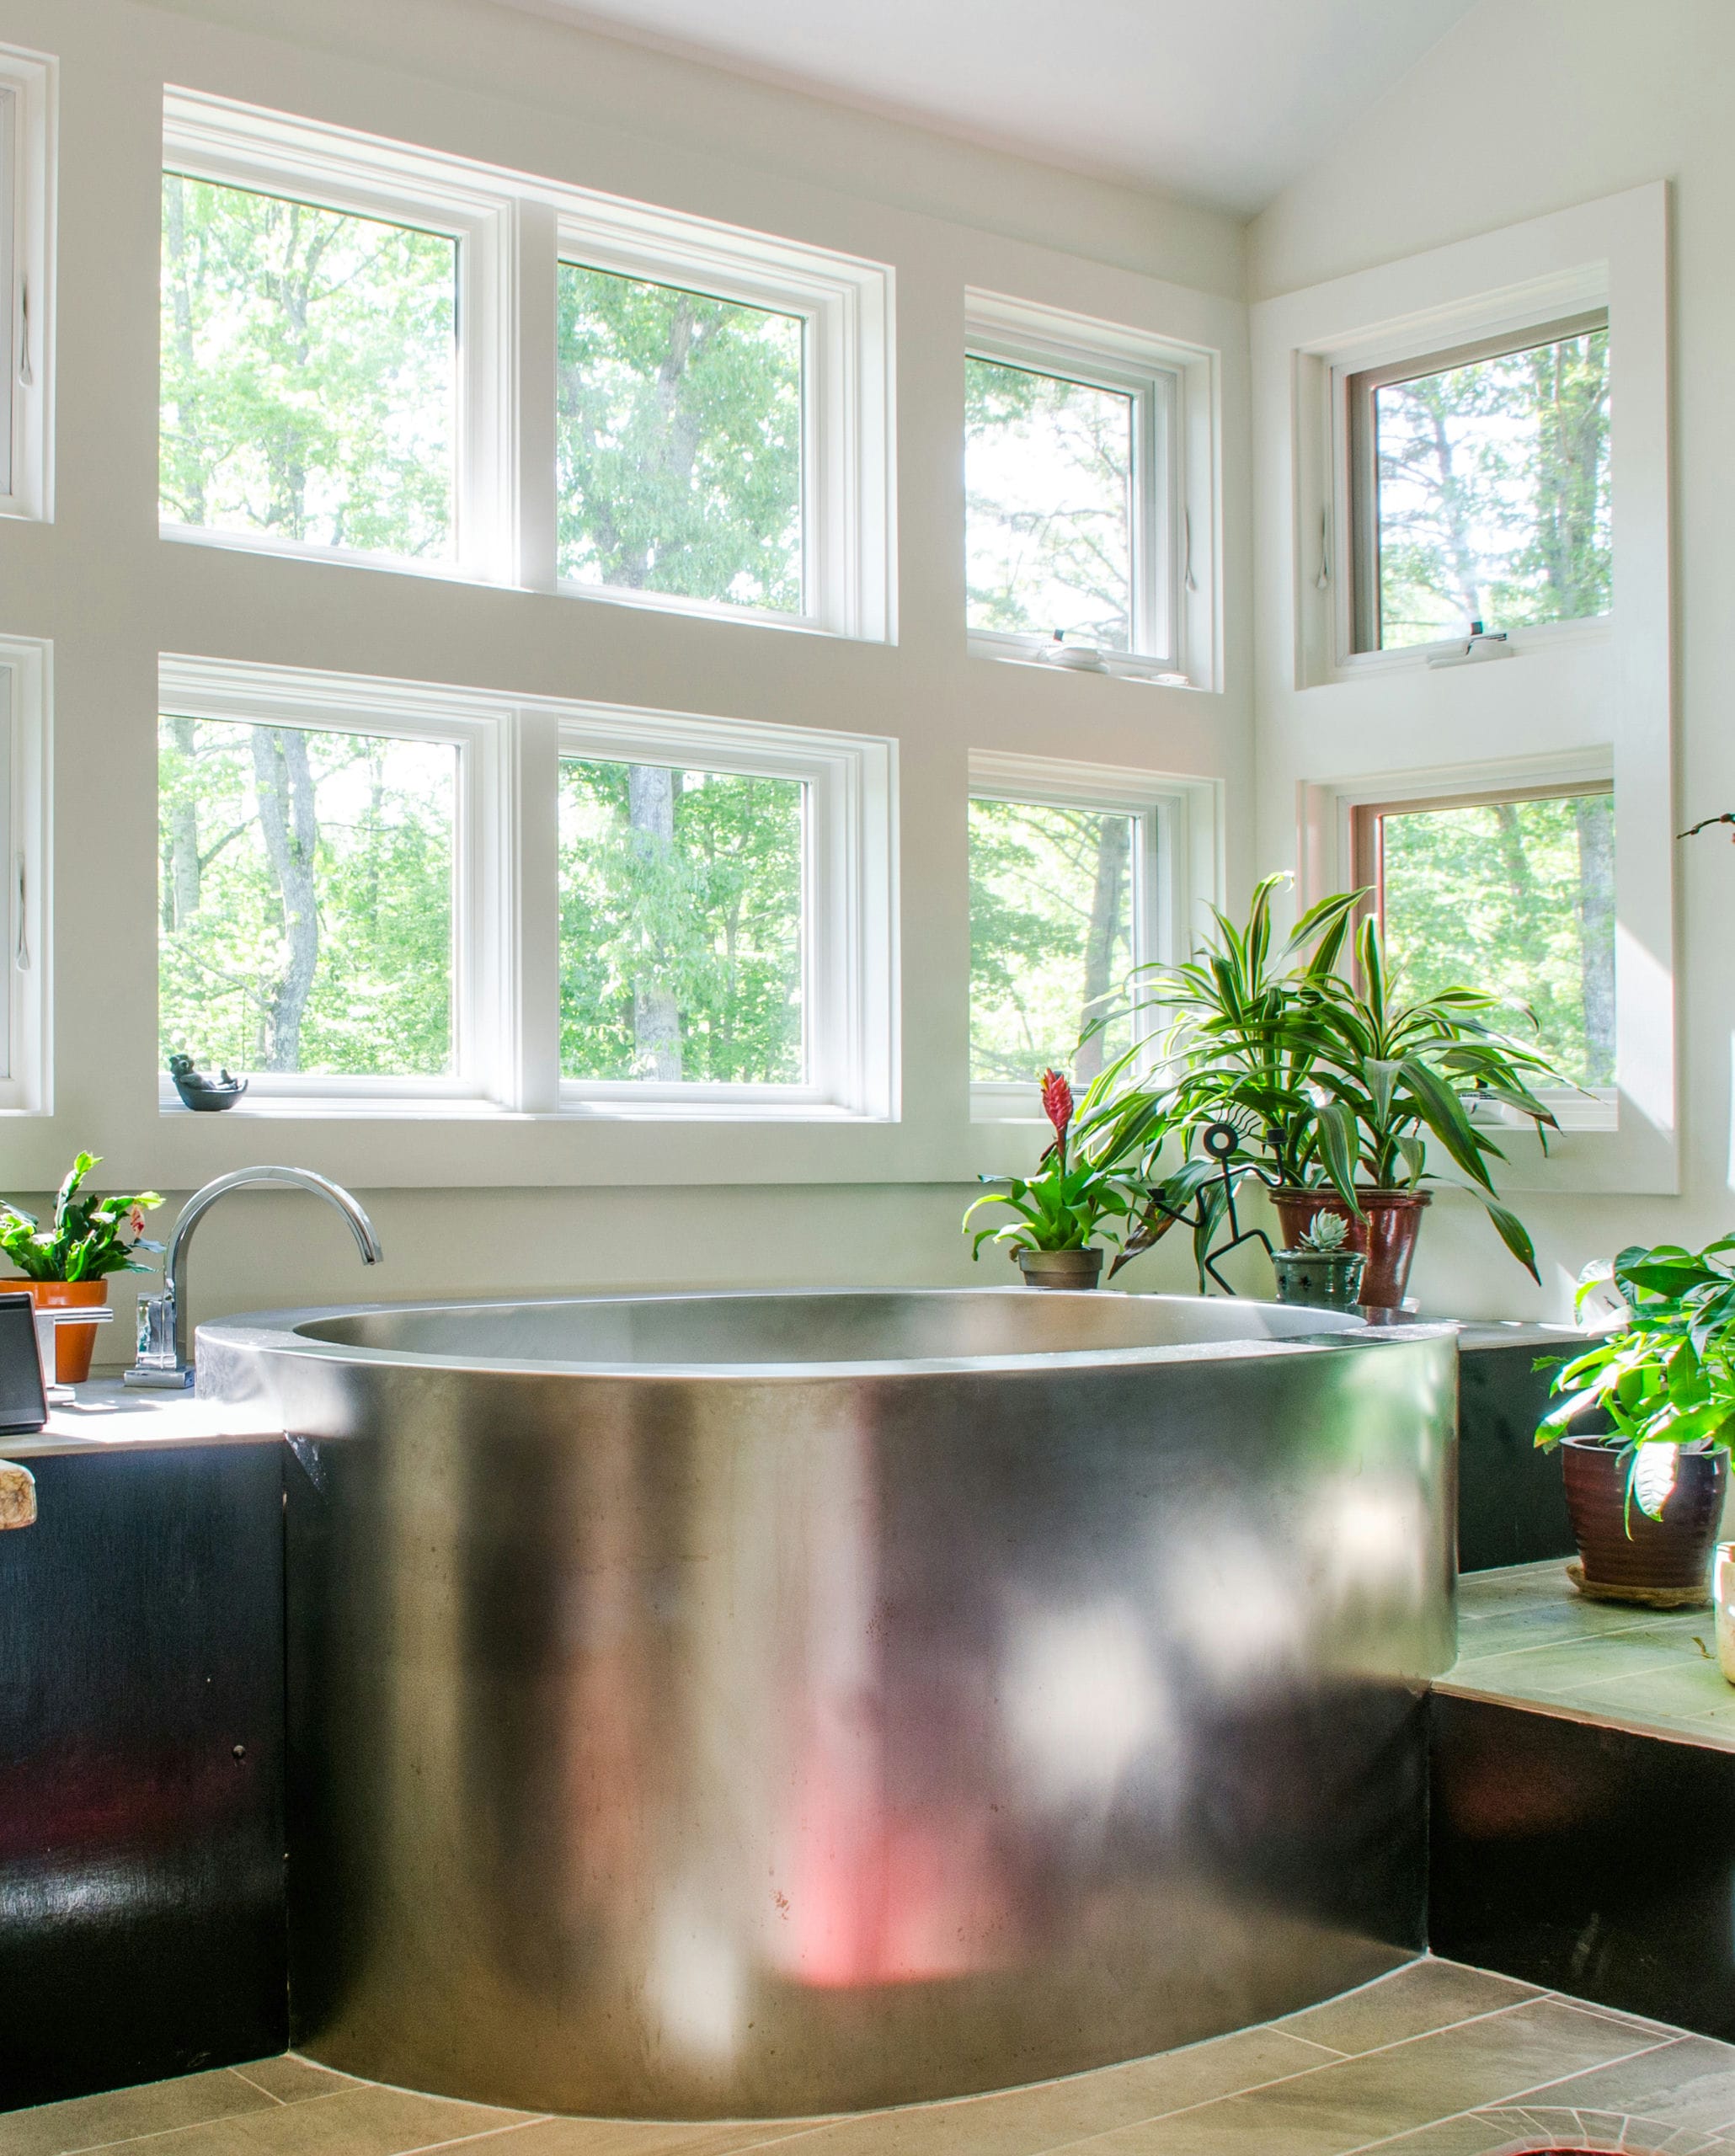 Sleek stainless steel Japanese soaking tub surrounded by plants and bay windows.